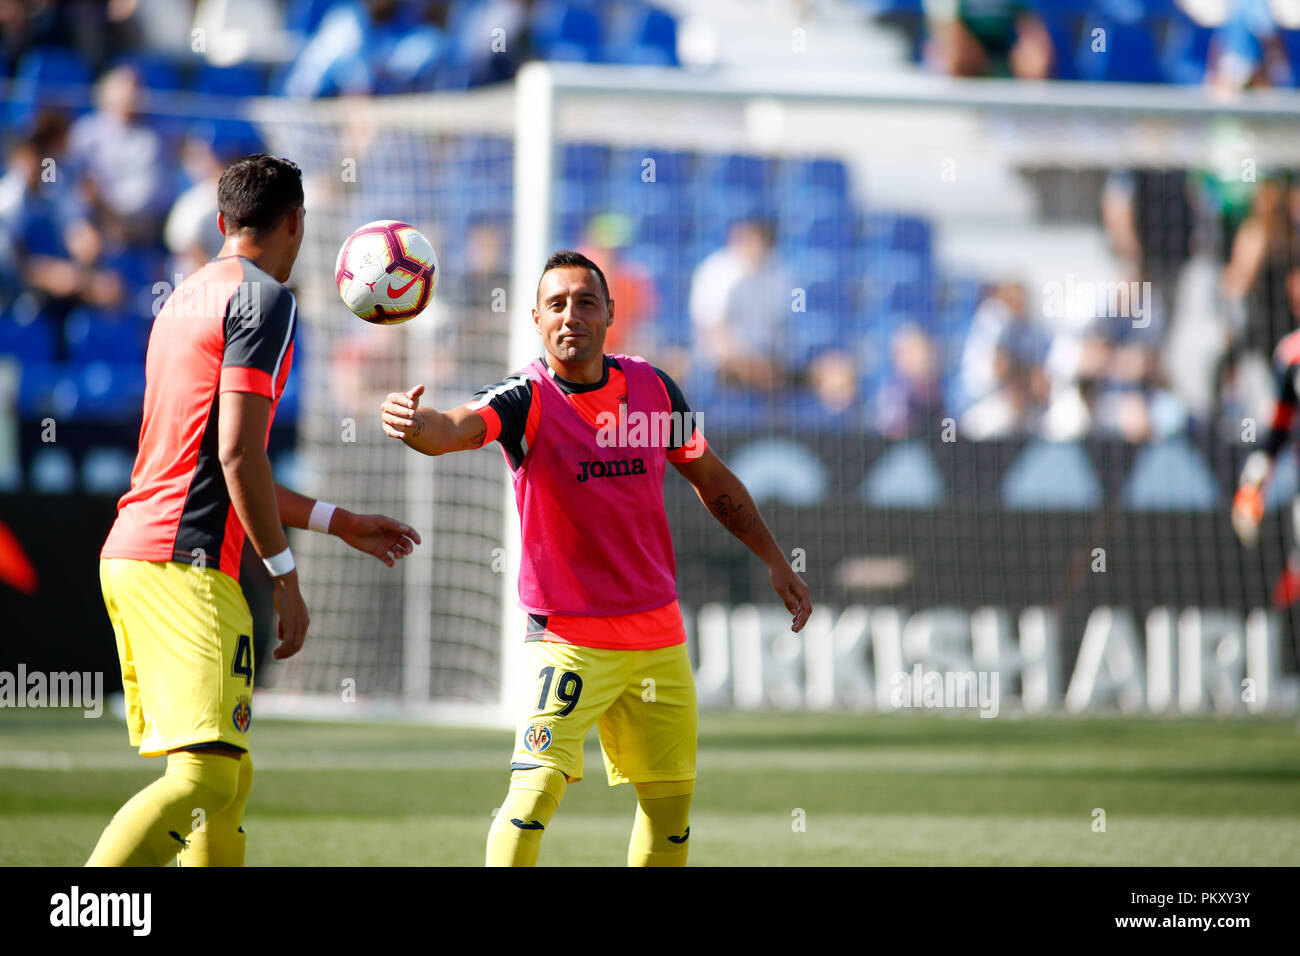 Madrid, Spain. 16th September 2018.  Madrid, Spain. 16th September 2018. Santi Cazorla of Villarreal during the spanish league, La Liga, football match between CD Leganes and Villarreal CF on September 16th, 2018 at Municipal Butarque stadium in Madrid, Spain. 16th Sep, 2018. Credit: AFP7/ZUMA Wire/Alamy Live News Stock Photo